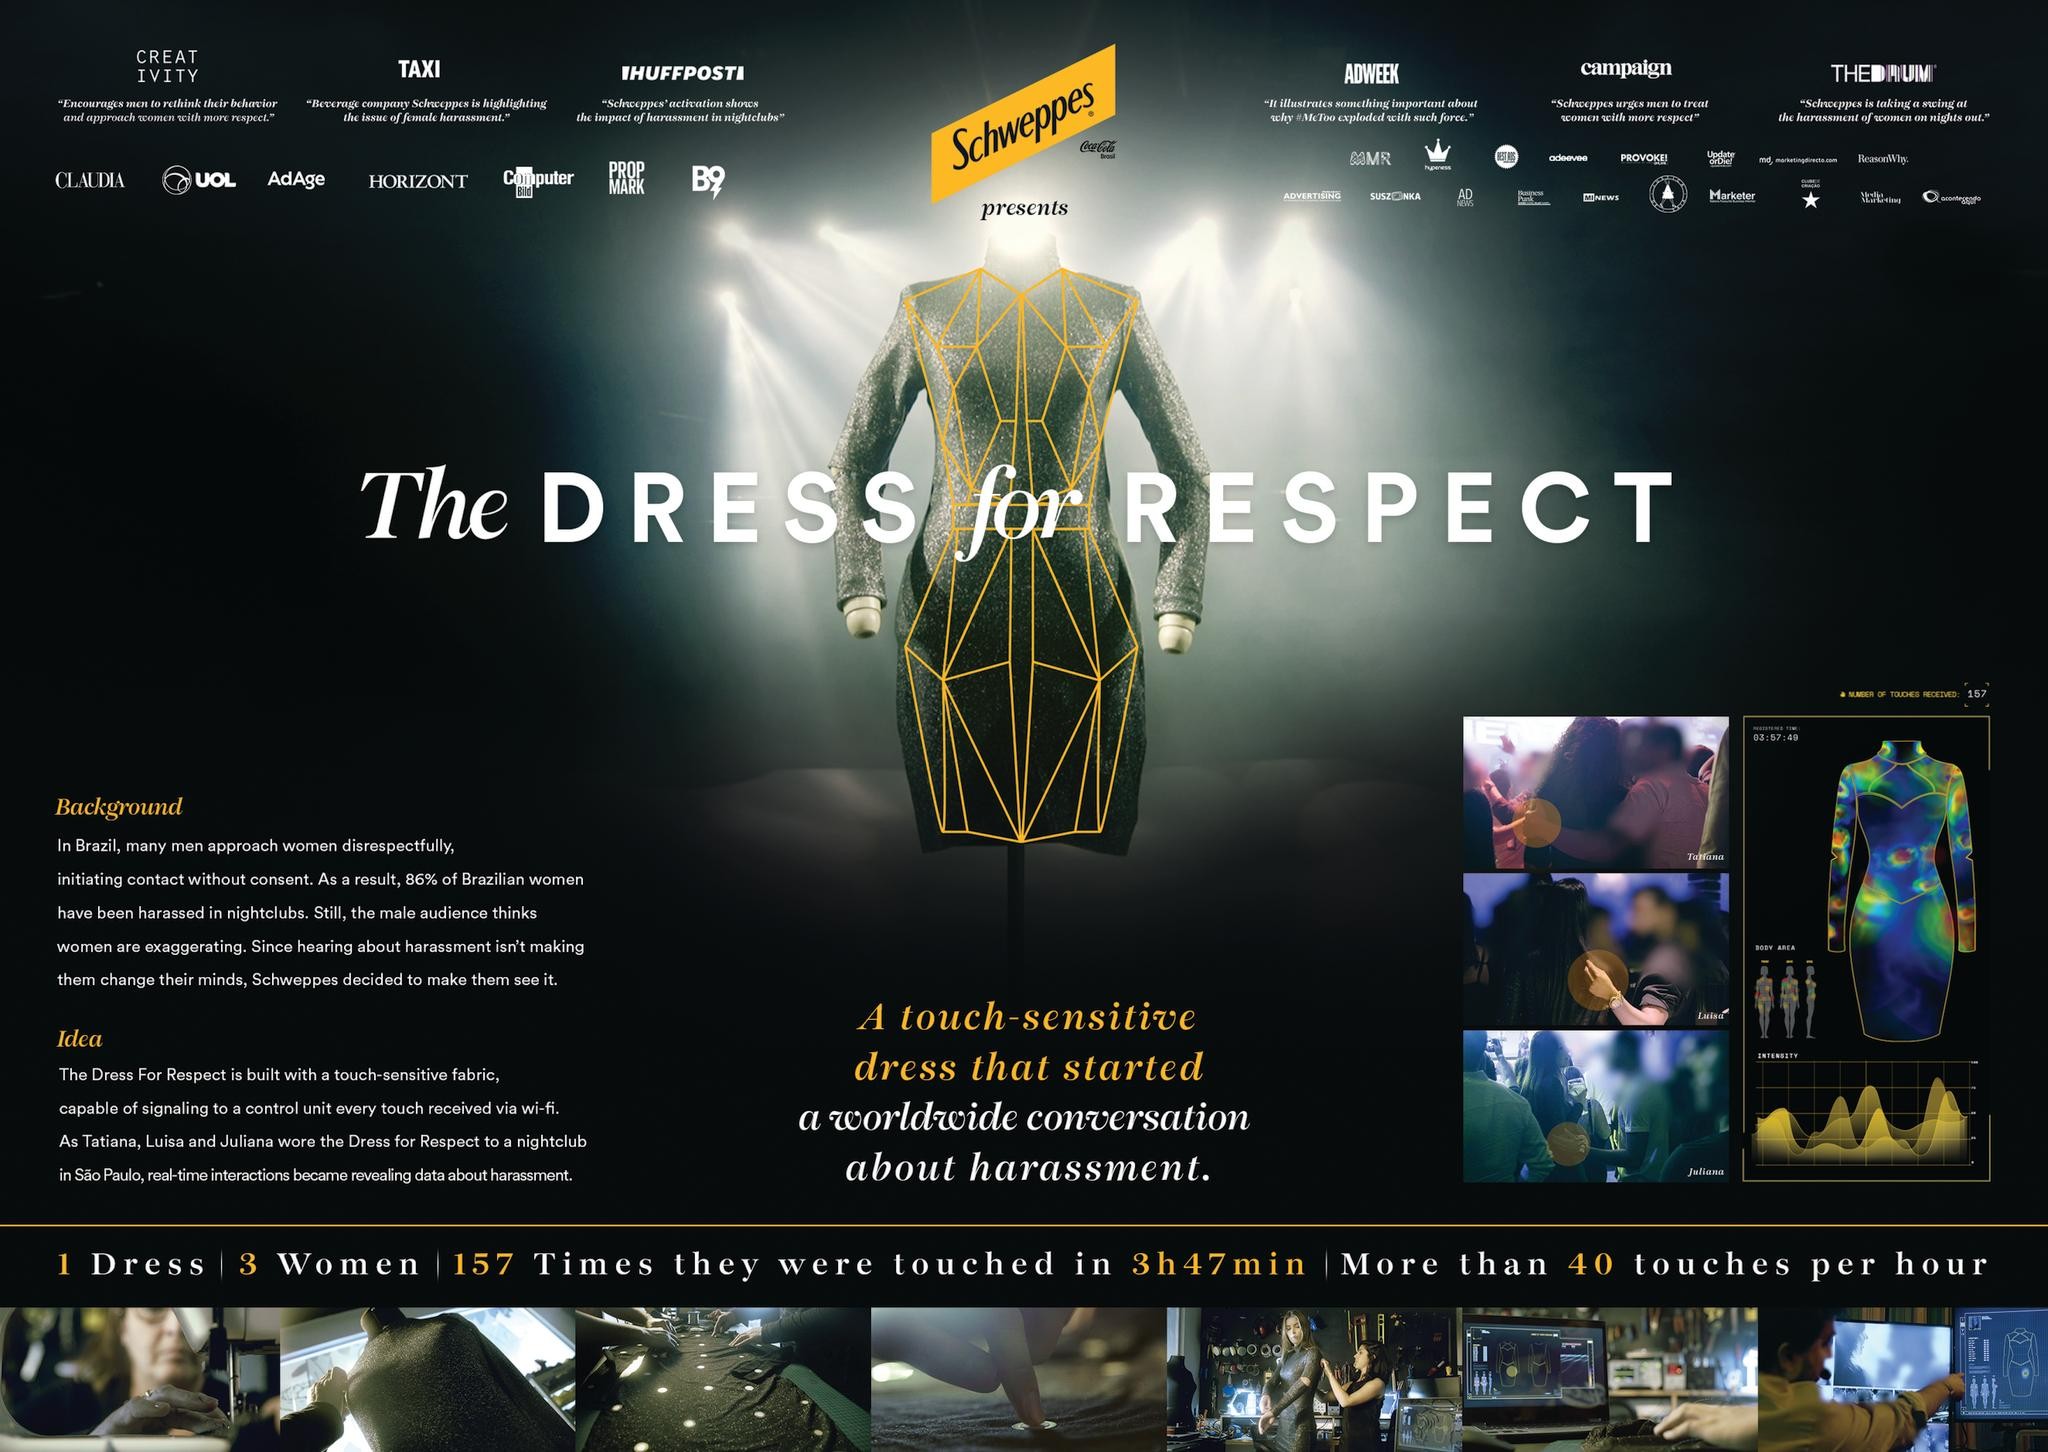 The Dress for Respect